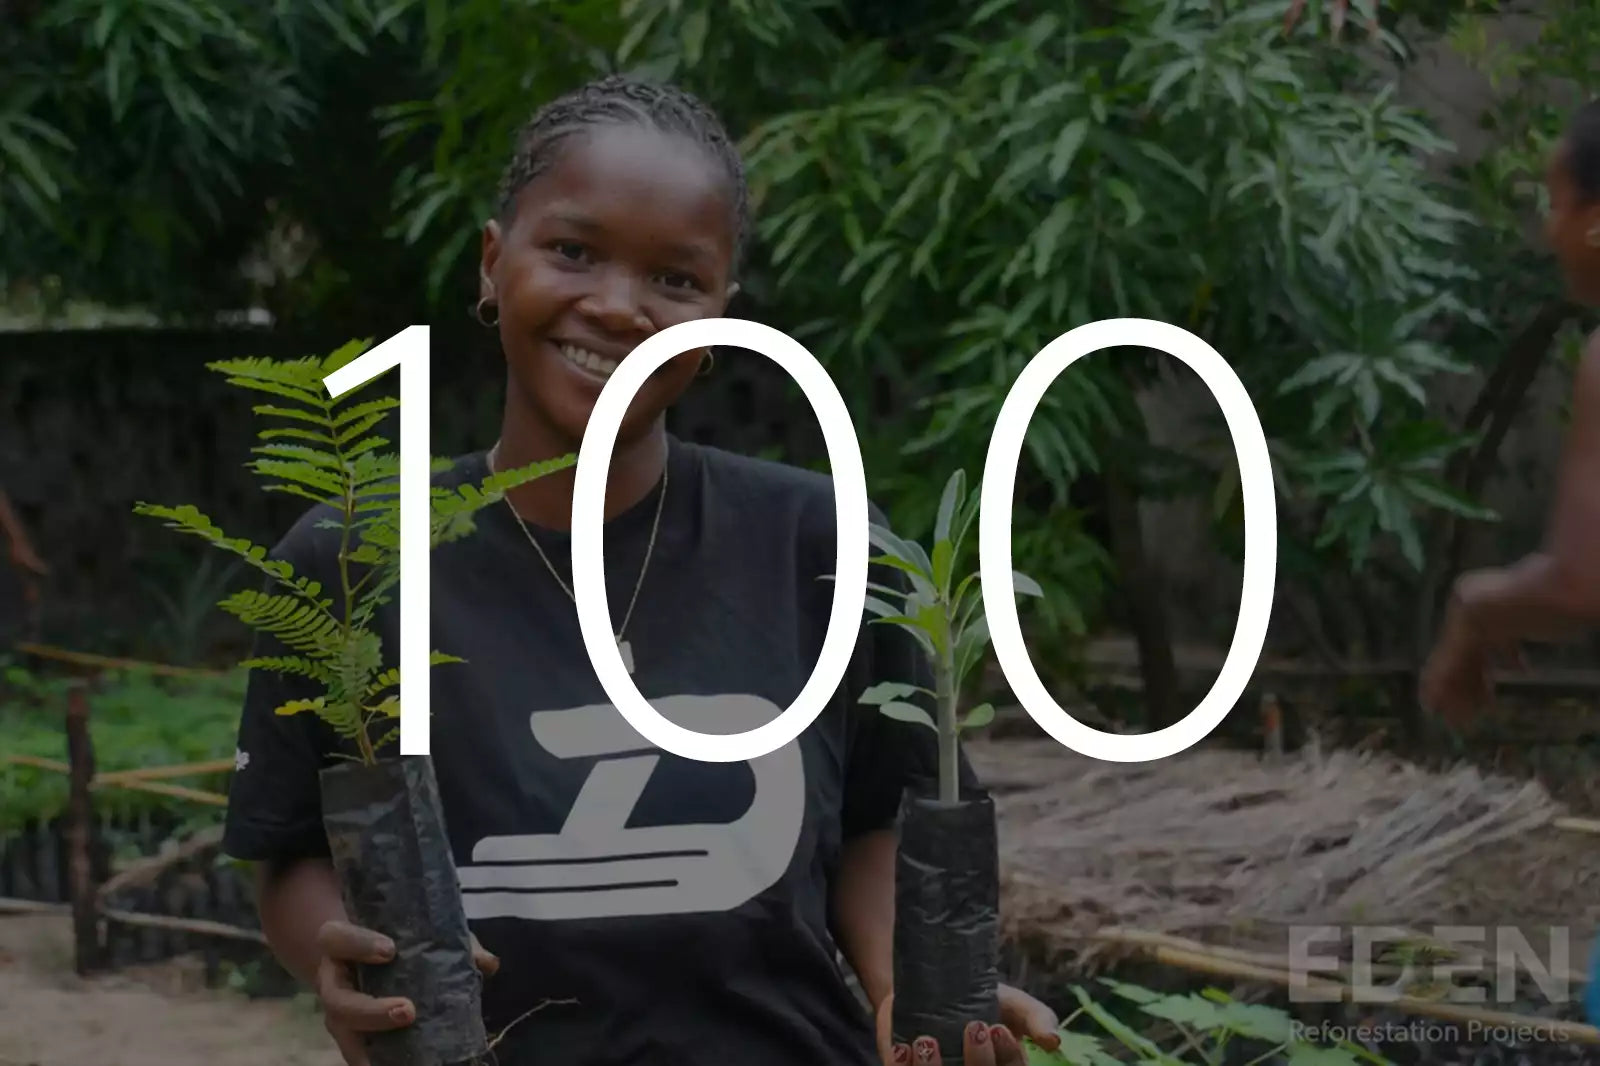 Plant 100 Trees With Eden Reforestation Projects